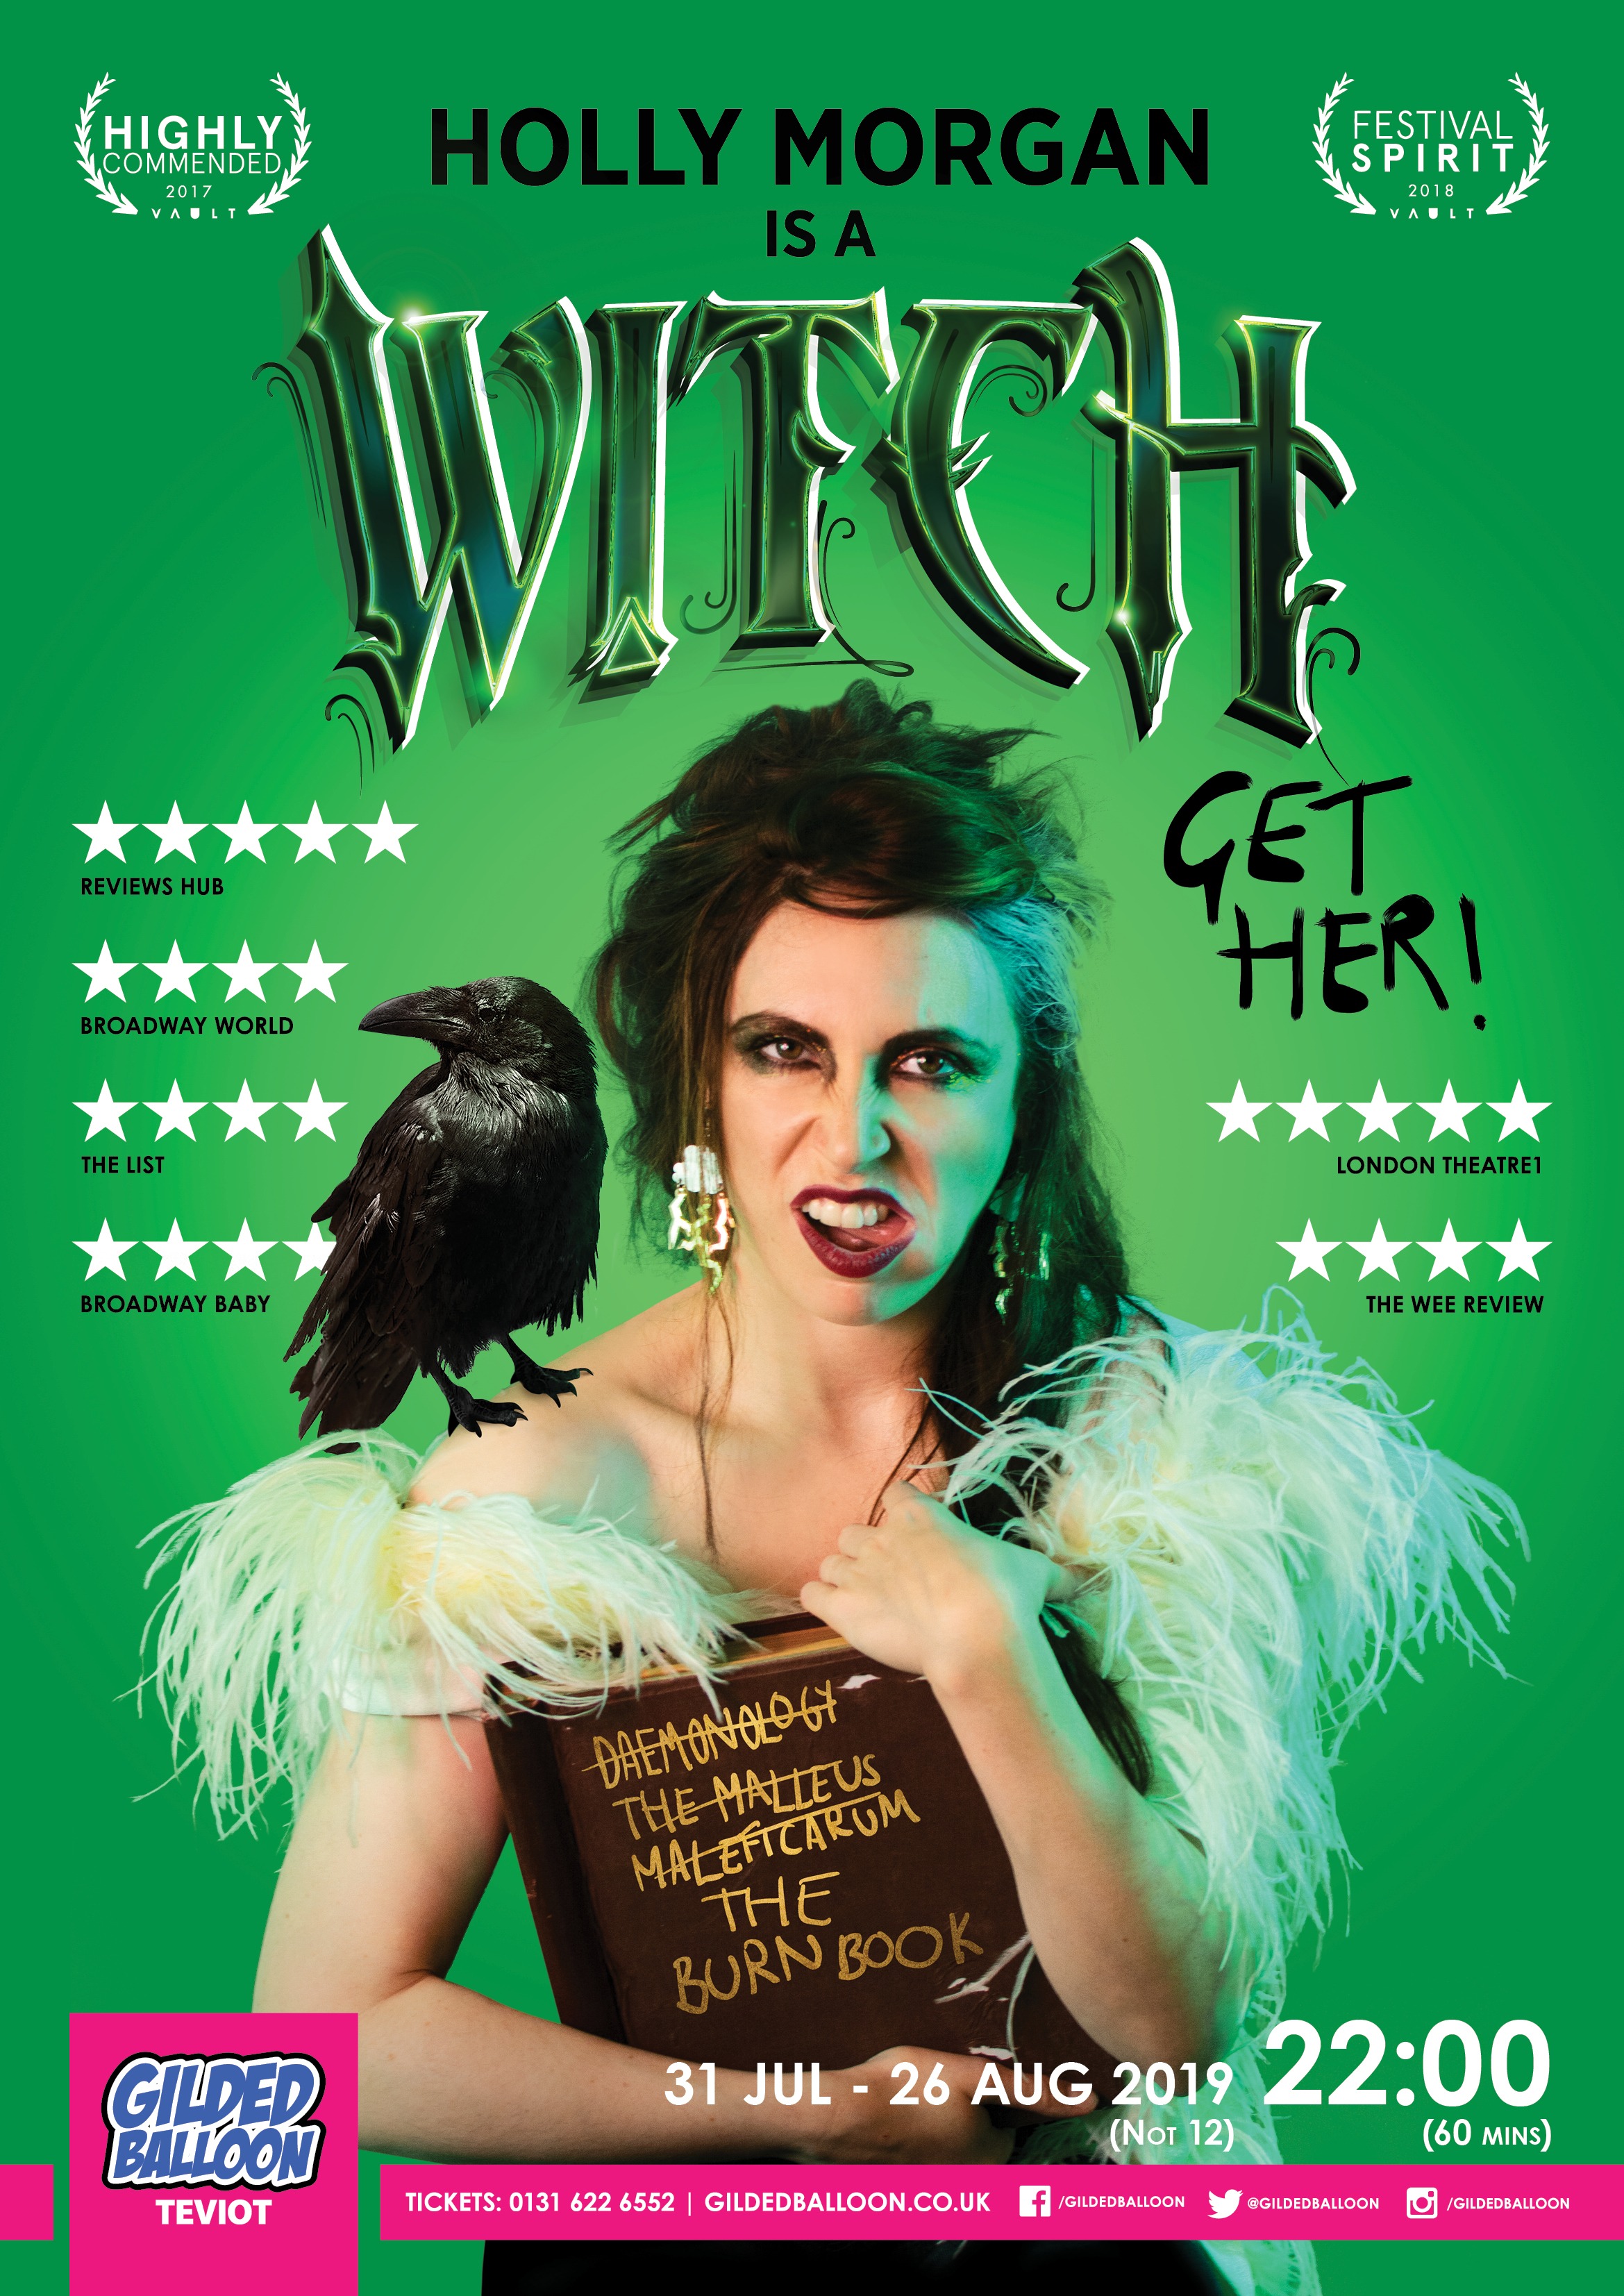 The poster for Holly Morgan: Is a Witch. Get Her!